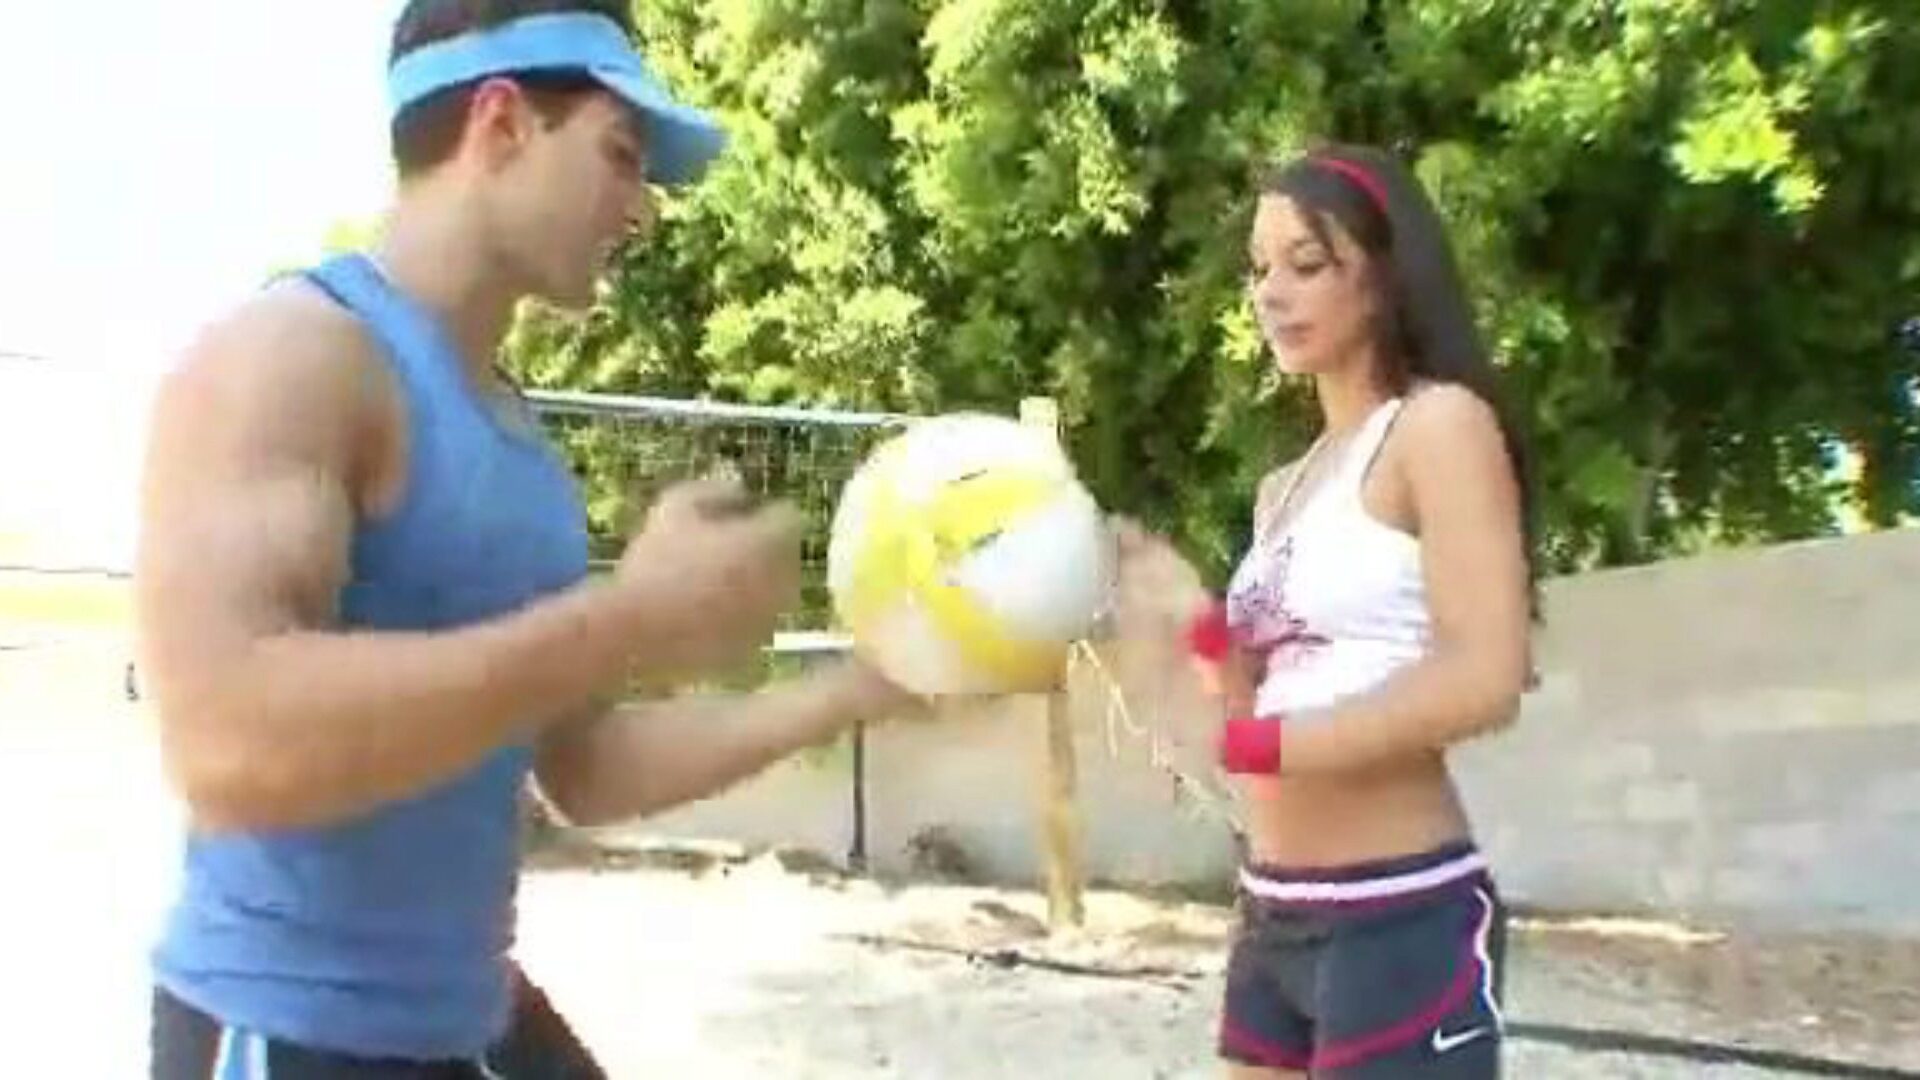 Barbie doll Mya Nichole acquires her wet crack and wazoo stuffed hard by her volleyball coa